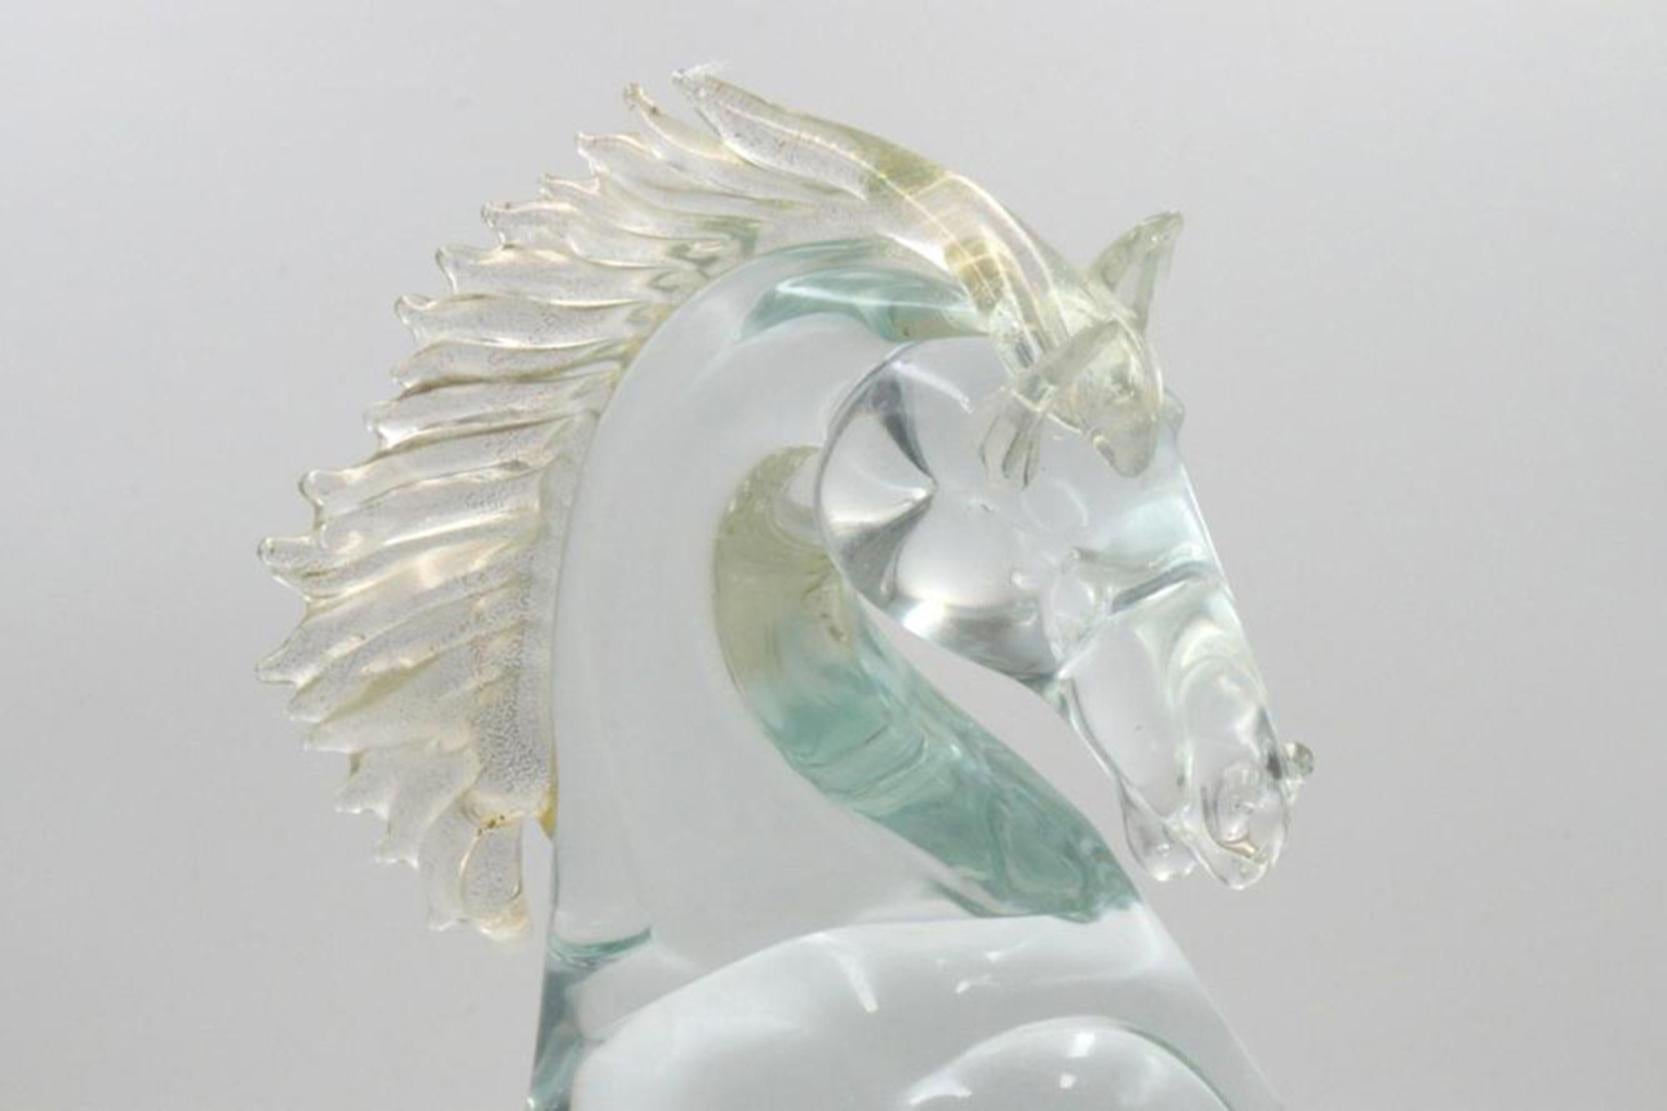 A spectacular clear glass horse sculpture of Murano glass, with gold flecks - Sculpture by Marco Guiman